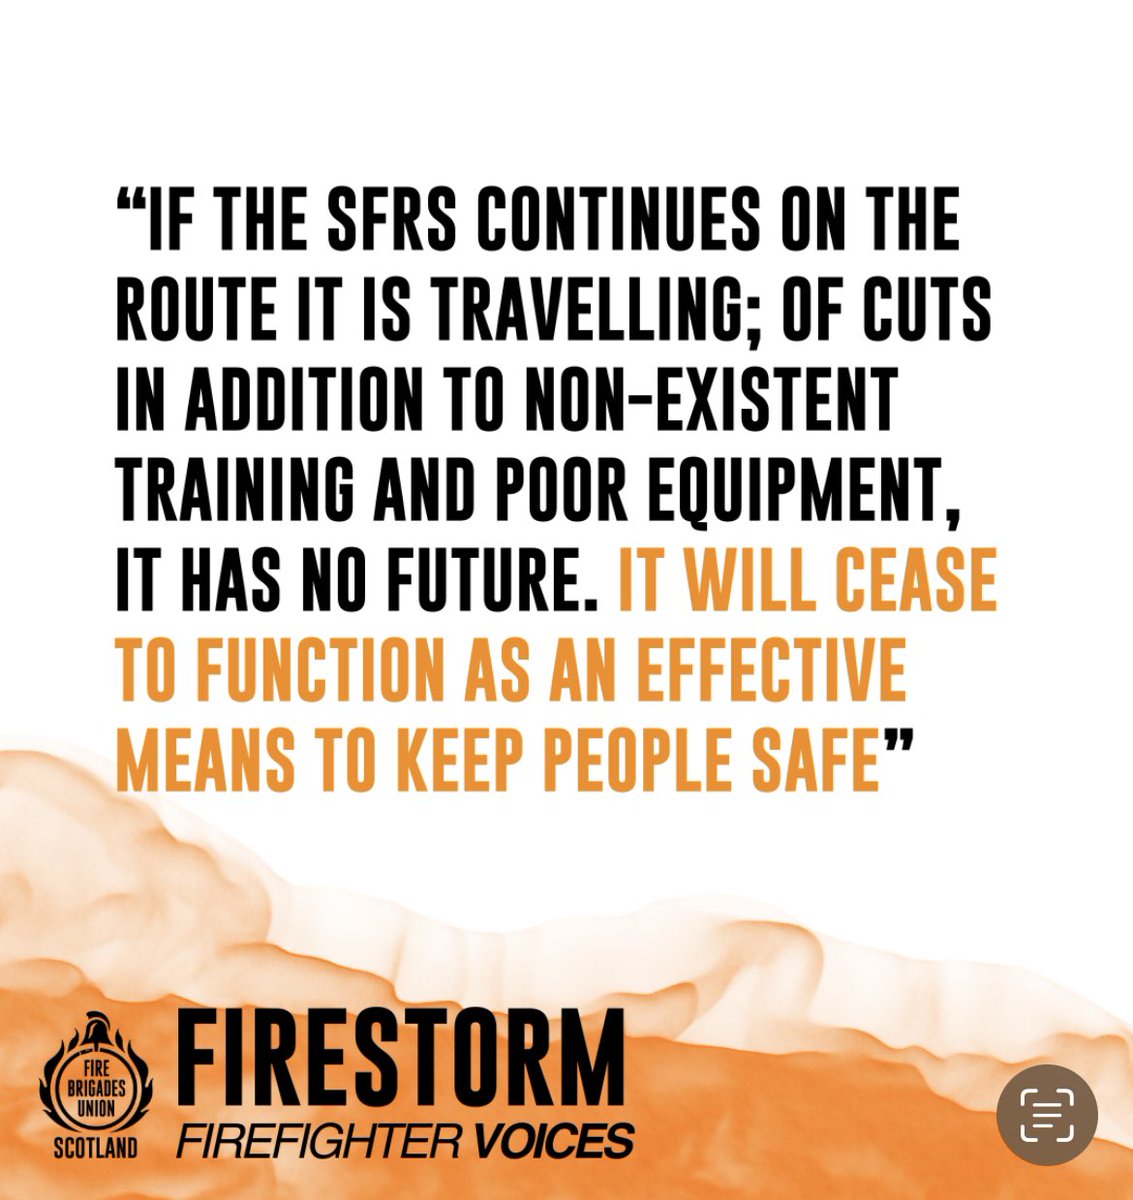 🔥The longer it takes a fire engine to get to a fire the higher the risk to the public of Scotland. Firefighters are not prepared for @scotgov to put our communities at further risk through lack of proper investment. Listen to the frontline!🔥🚒 #CutsCostLives #Firestorm